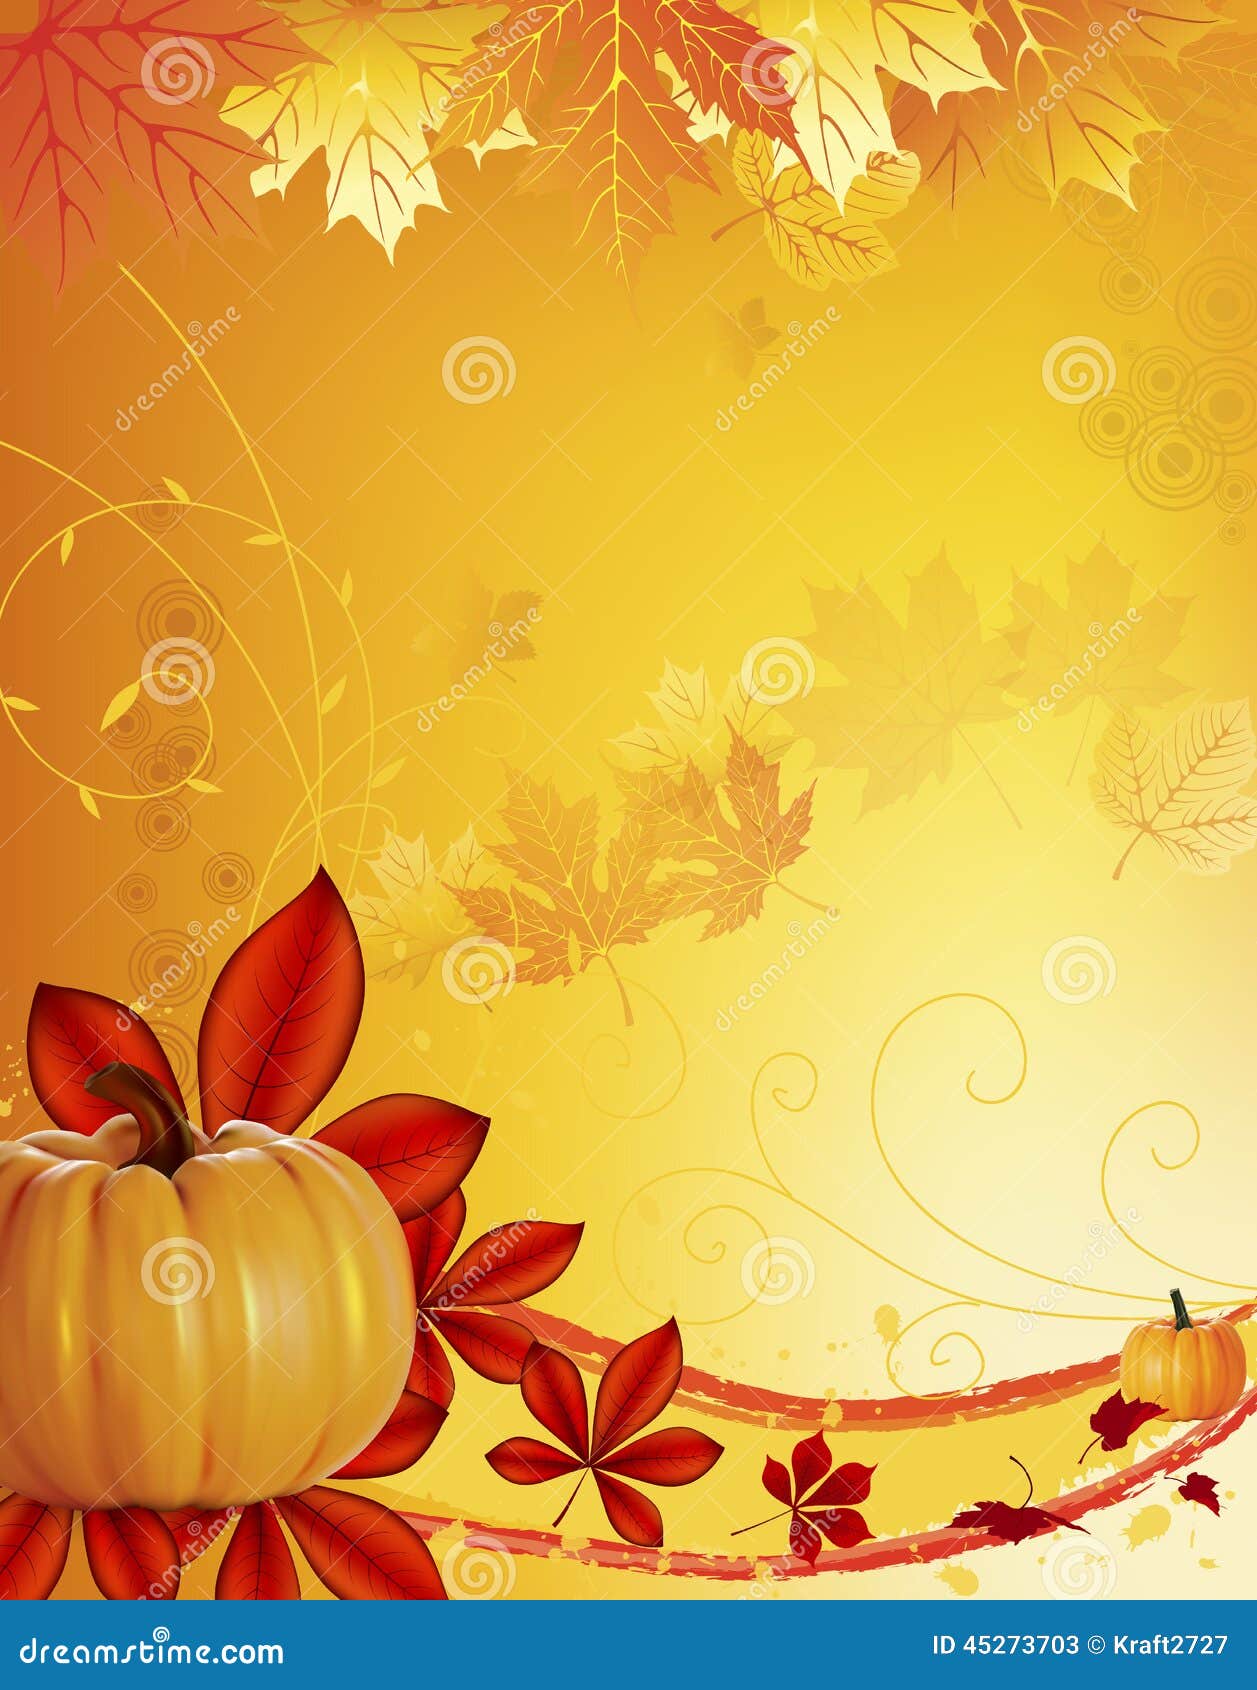 Autumn pumpkin stock image. Image of effect, colored - 45273703